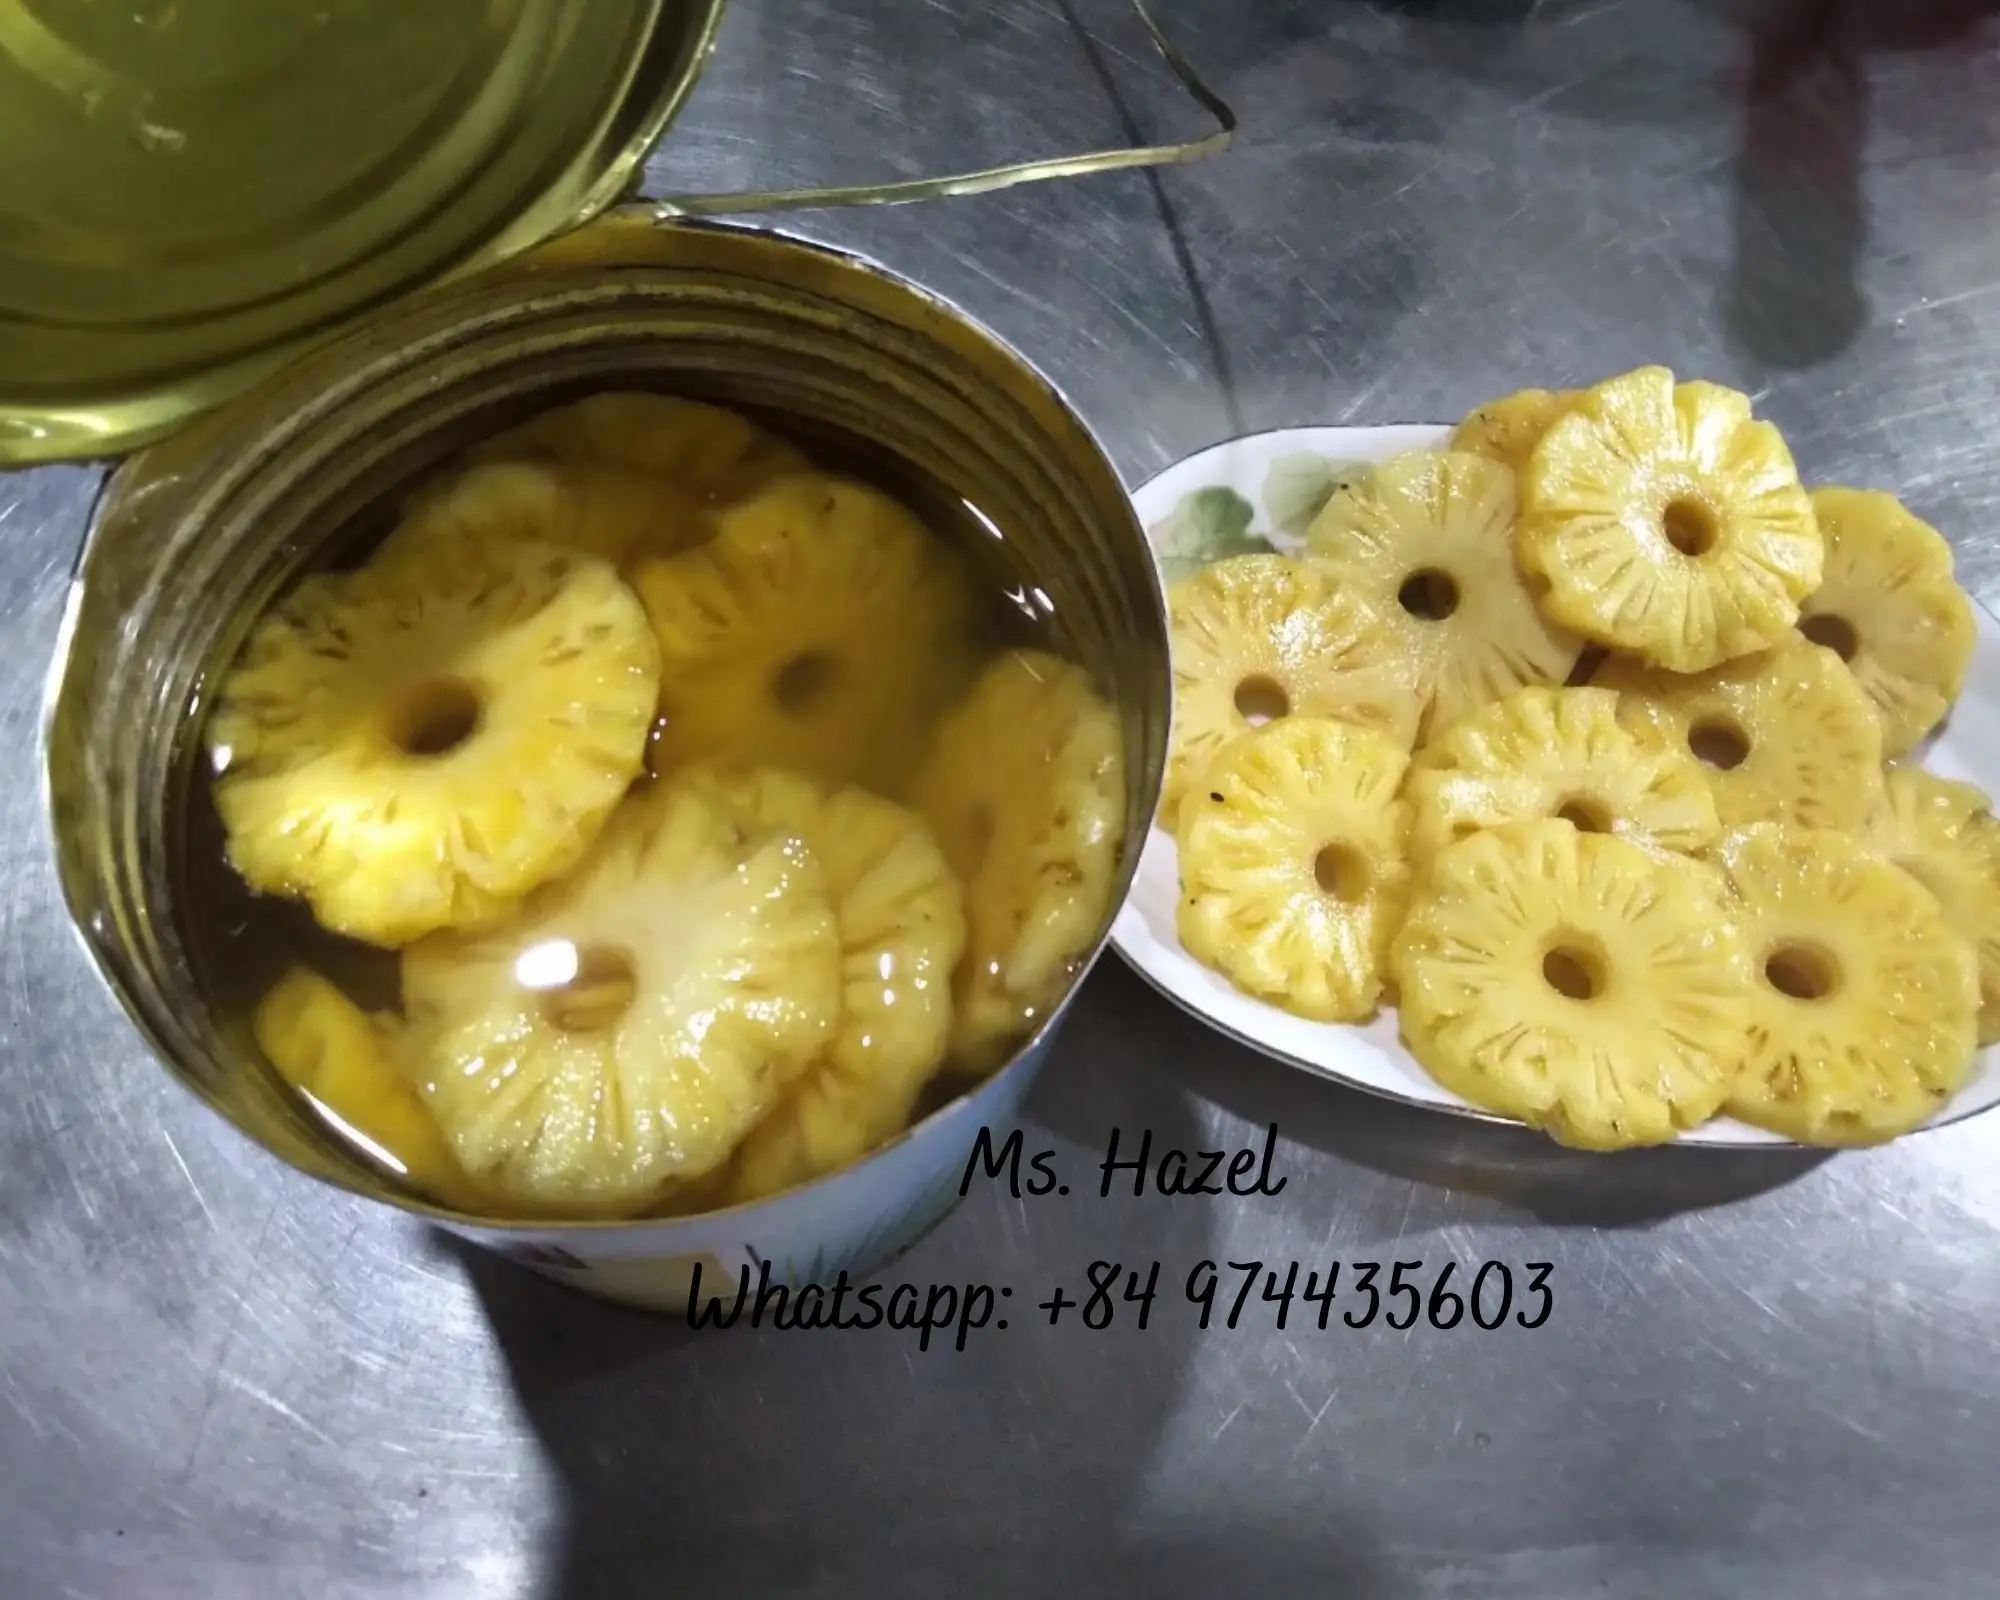 Supplier Canned Pineapple With Normal Lids From Vietnam/Ms. Hazel (+84) 974435603